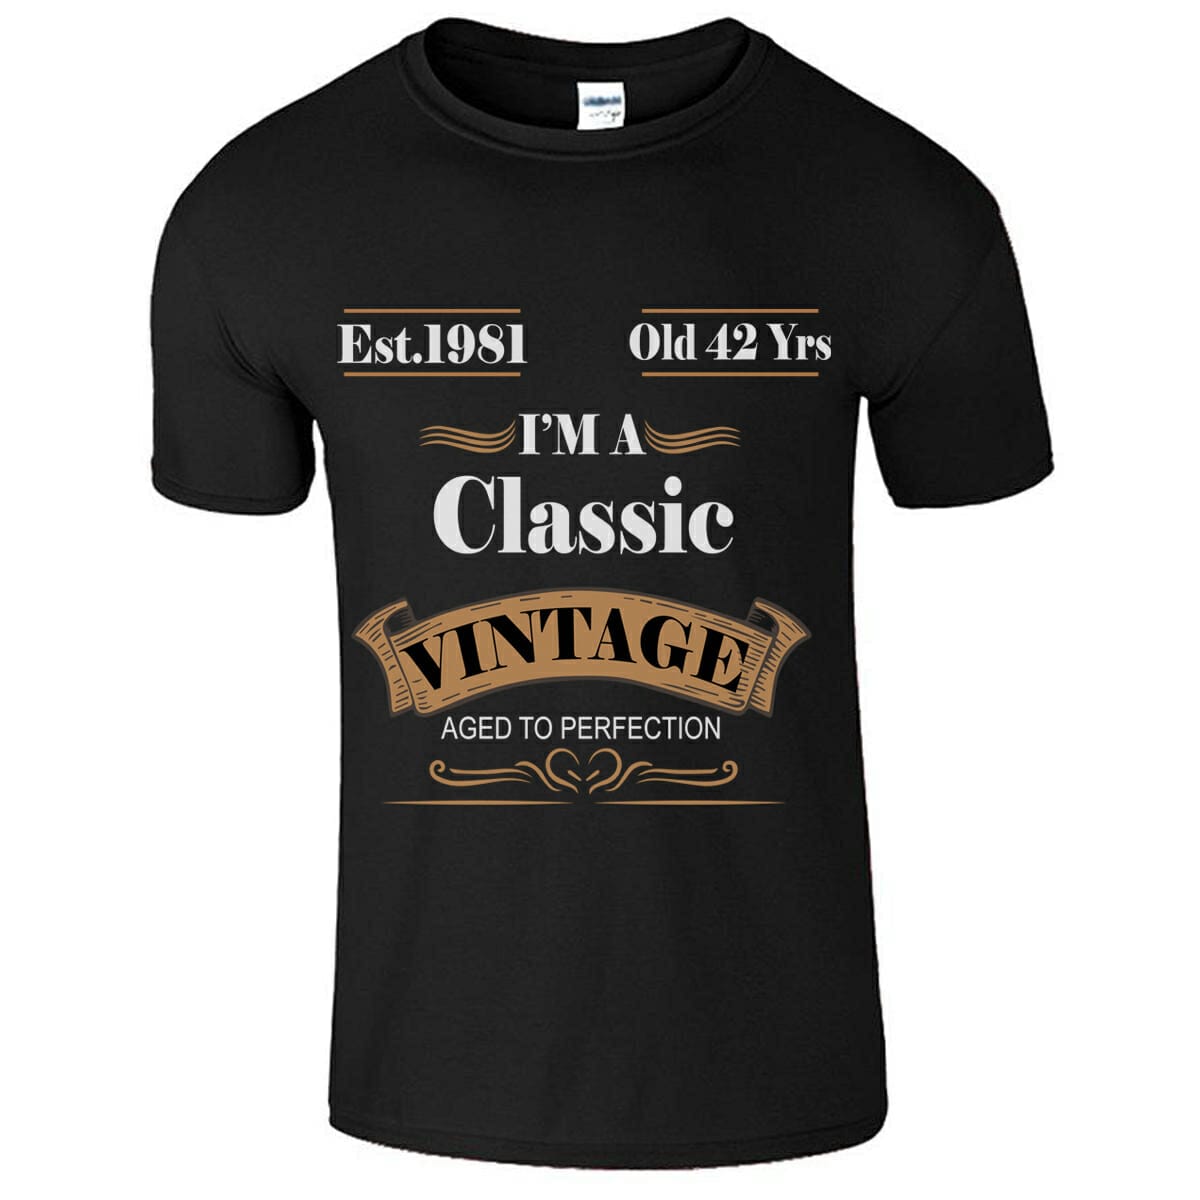 Est 1981 Old 42 Yrs I'm Classic Vintage Aged To Perfection T-Shirt Design